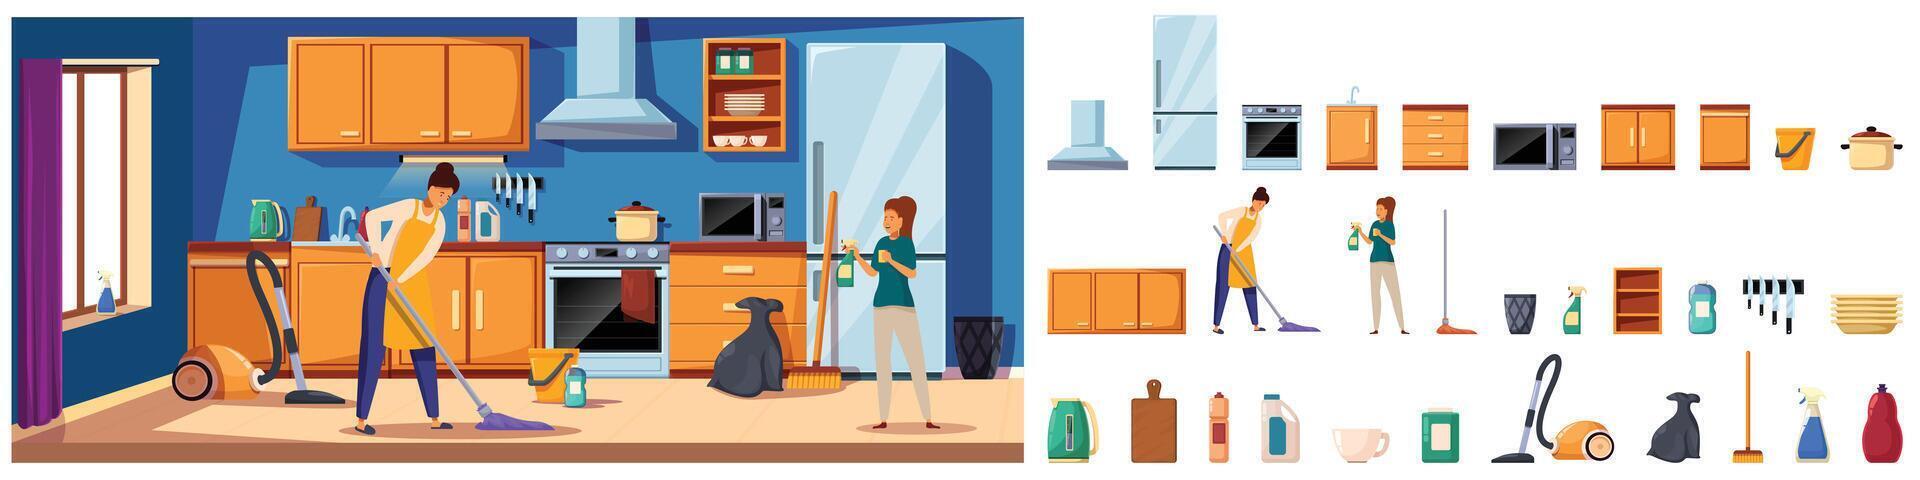 Housewife cleaning kitchen icons set cartoon vector. Woman with broom and sponge vector